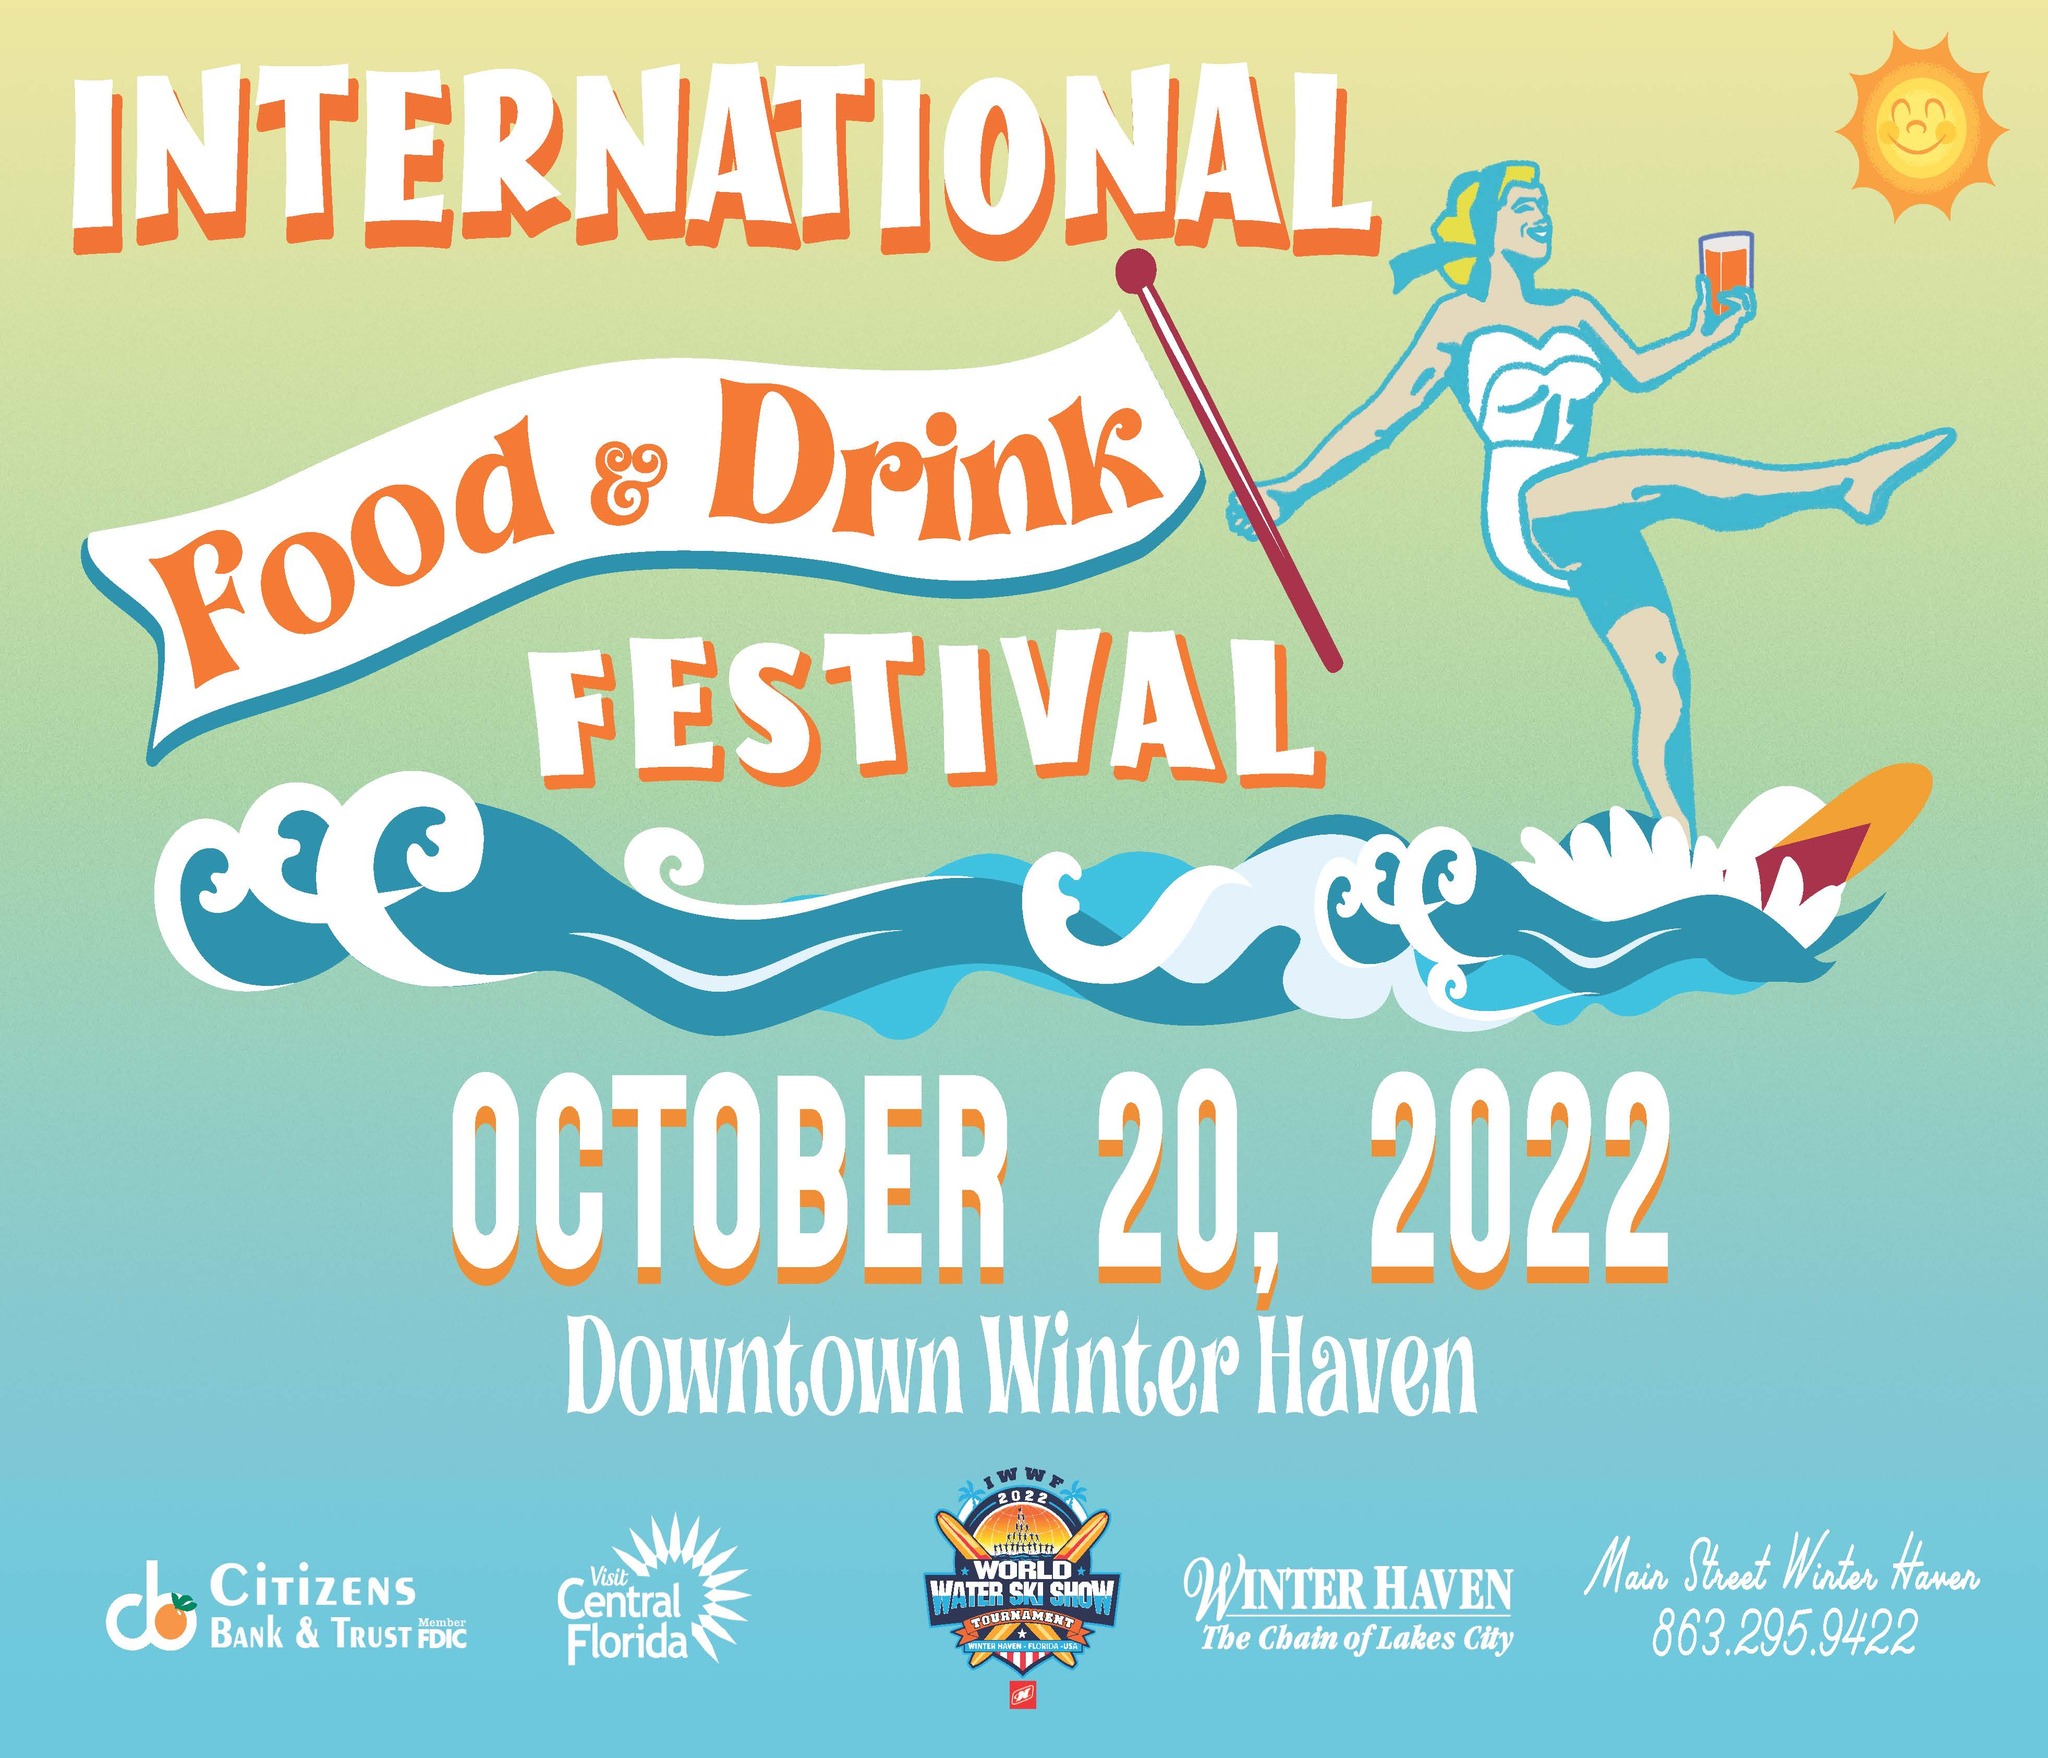 Ad for the International Food and Drink Festival Winter Haven